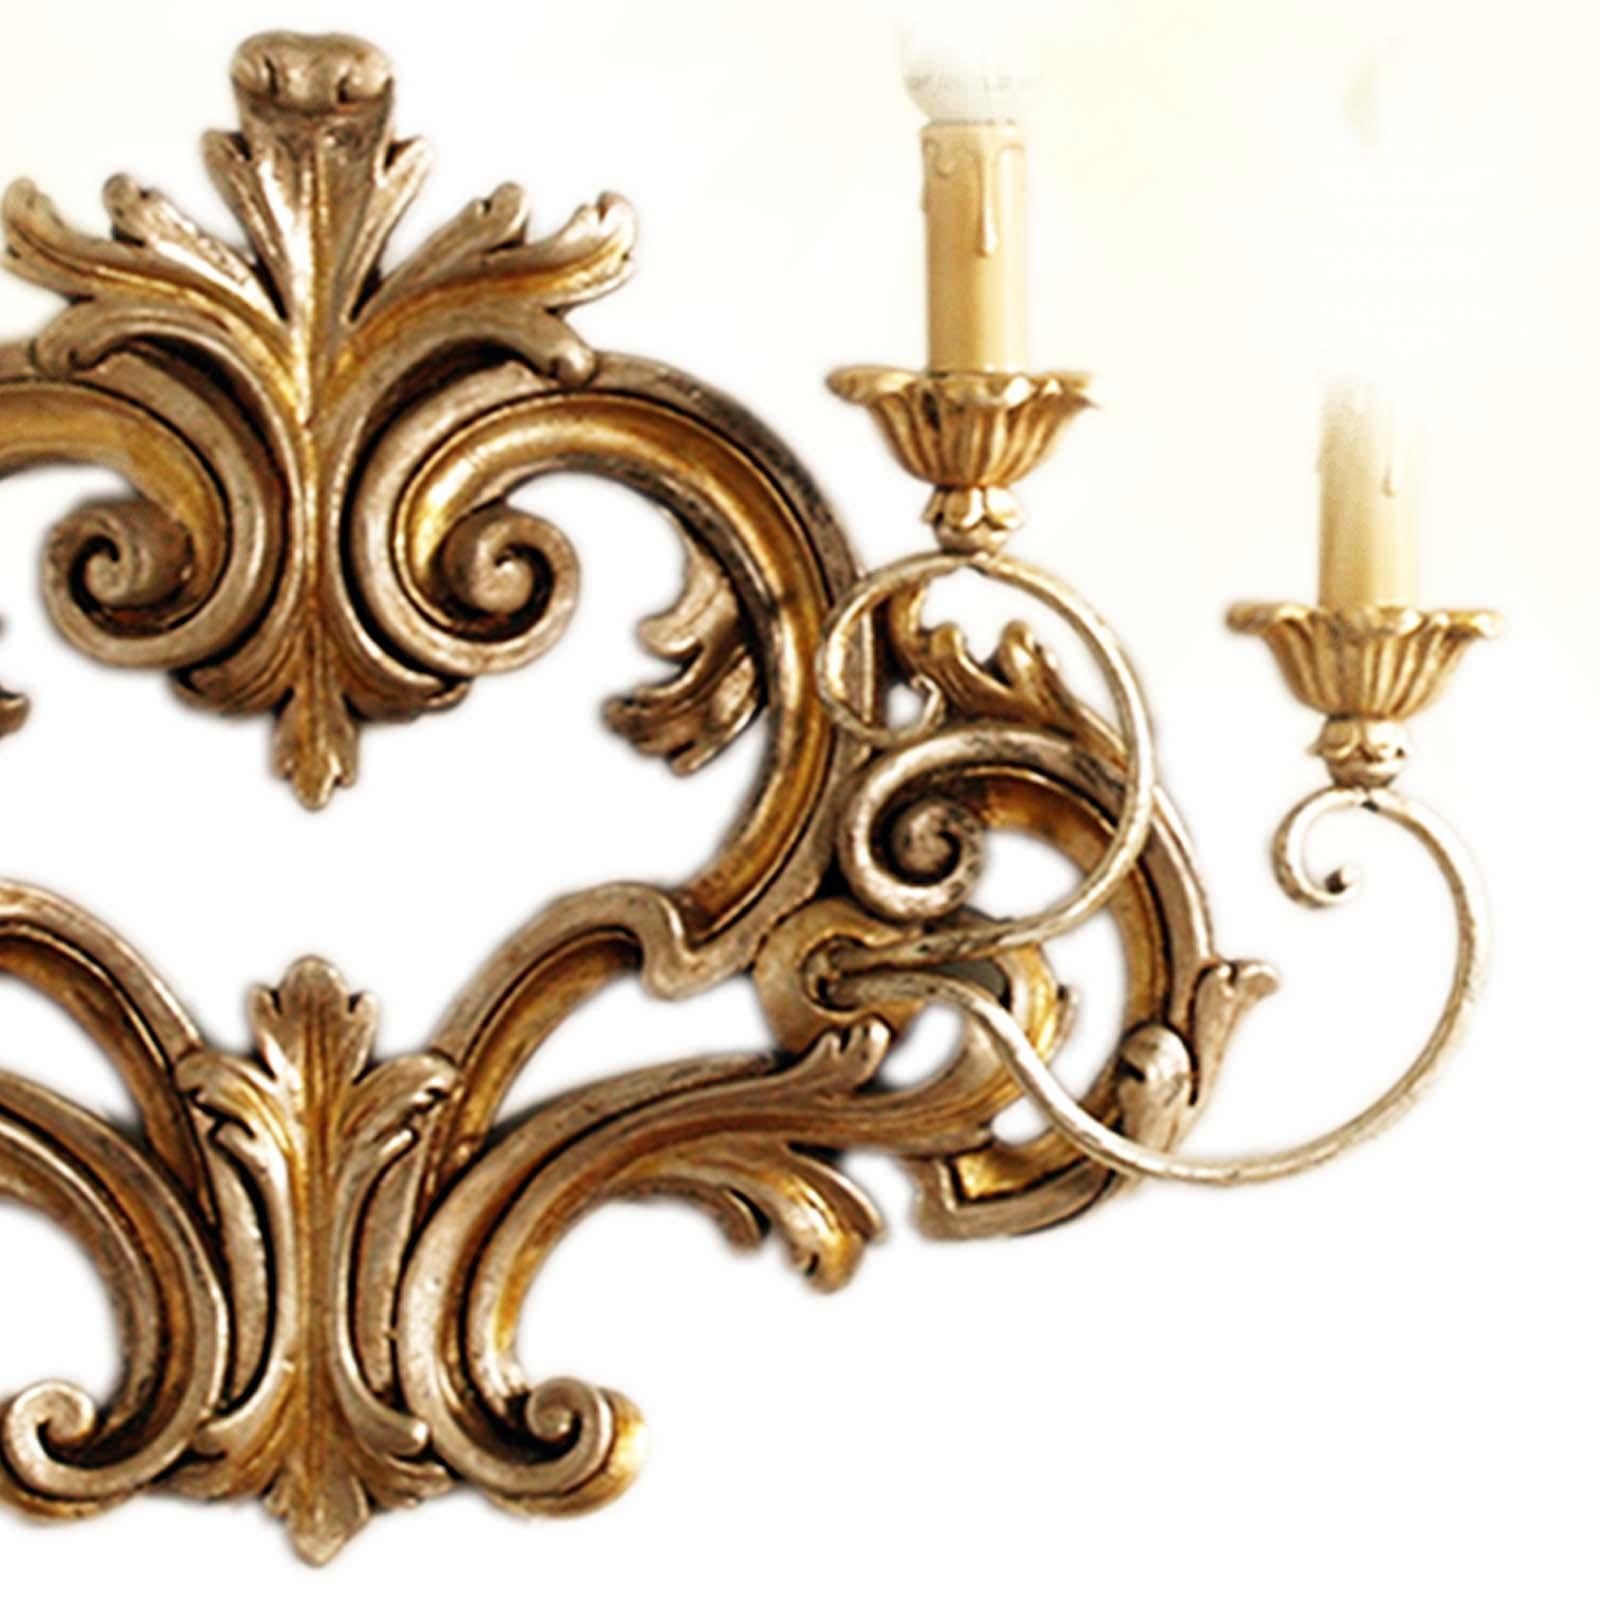 Hand-Carved Pair of Carved and Gilded Wood Ornamental Sconces Testolini Freres Venetian work For Sale